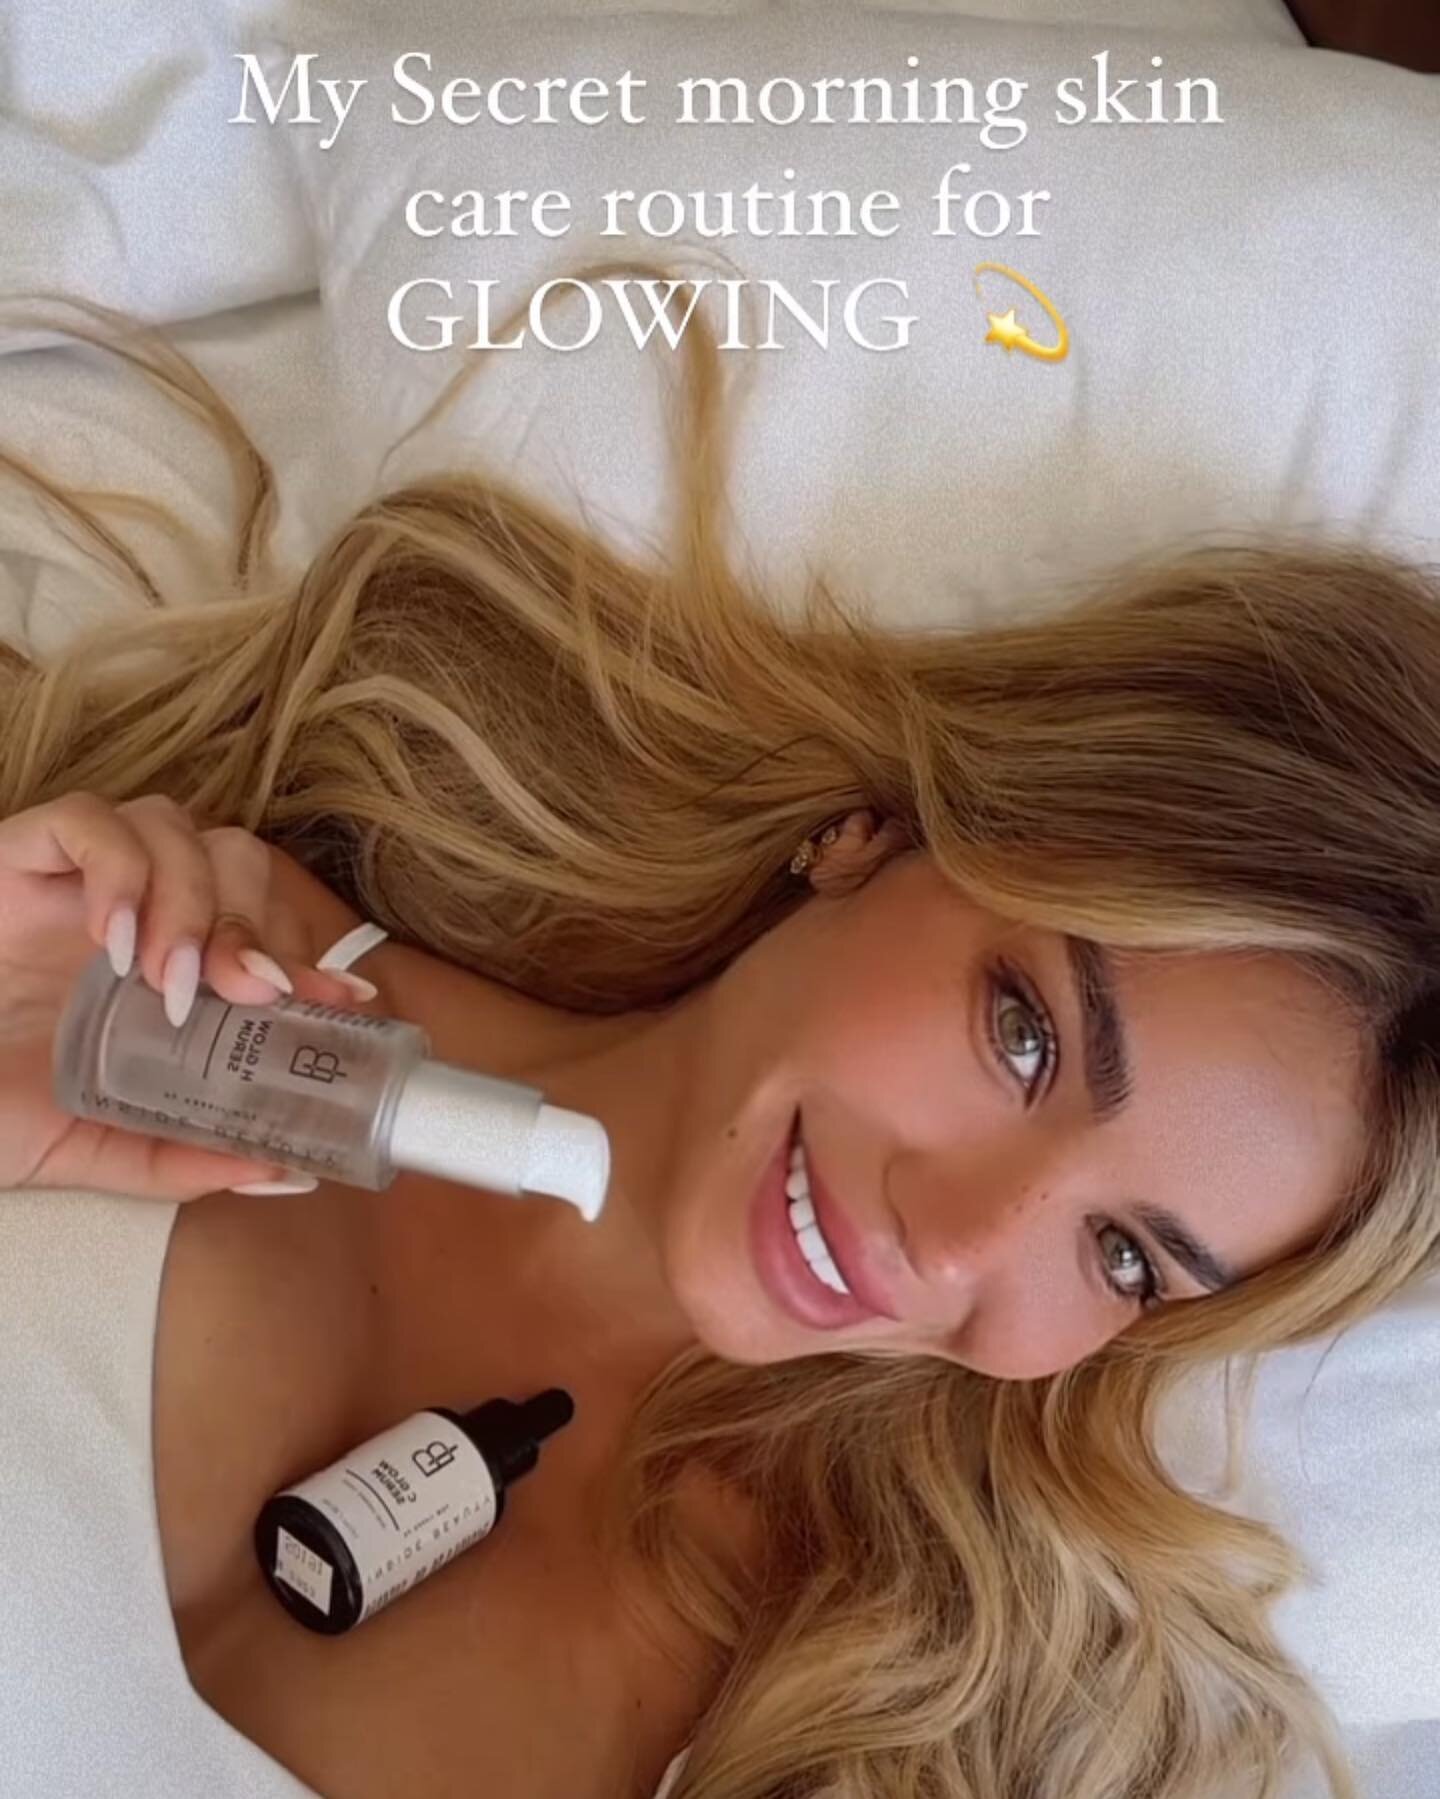 @aleskagenesis keeping up with her Inside Beauty skincare routine for glowing skin!✨✨

Using our C Glow Serum &amp; H Glow Serum in her morning and nighttime routine

☀️Morning: C GLOW SERUM🍋Radiant and fresh morning skin with the Inside Beauty Vita